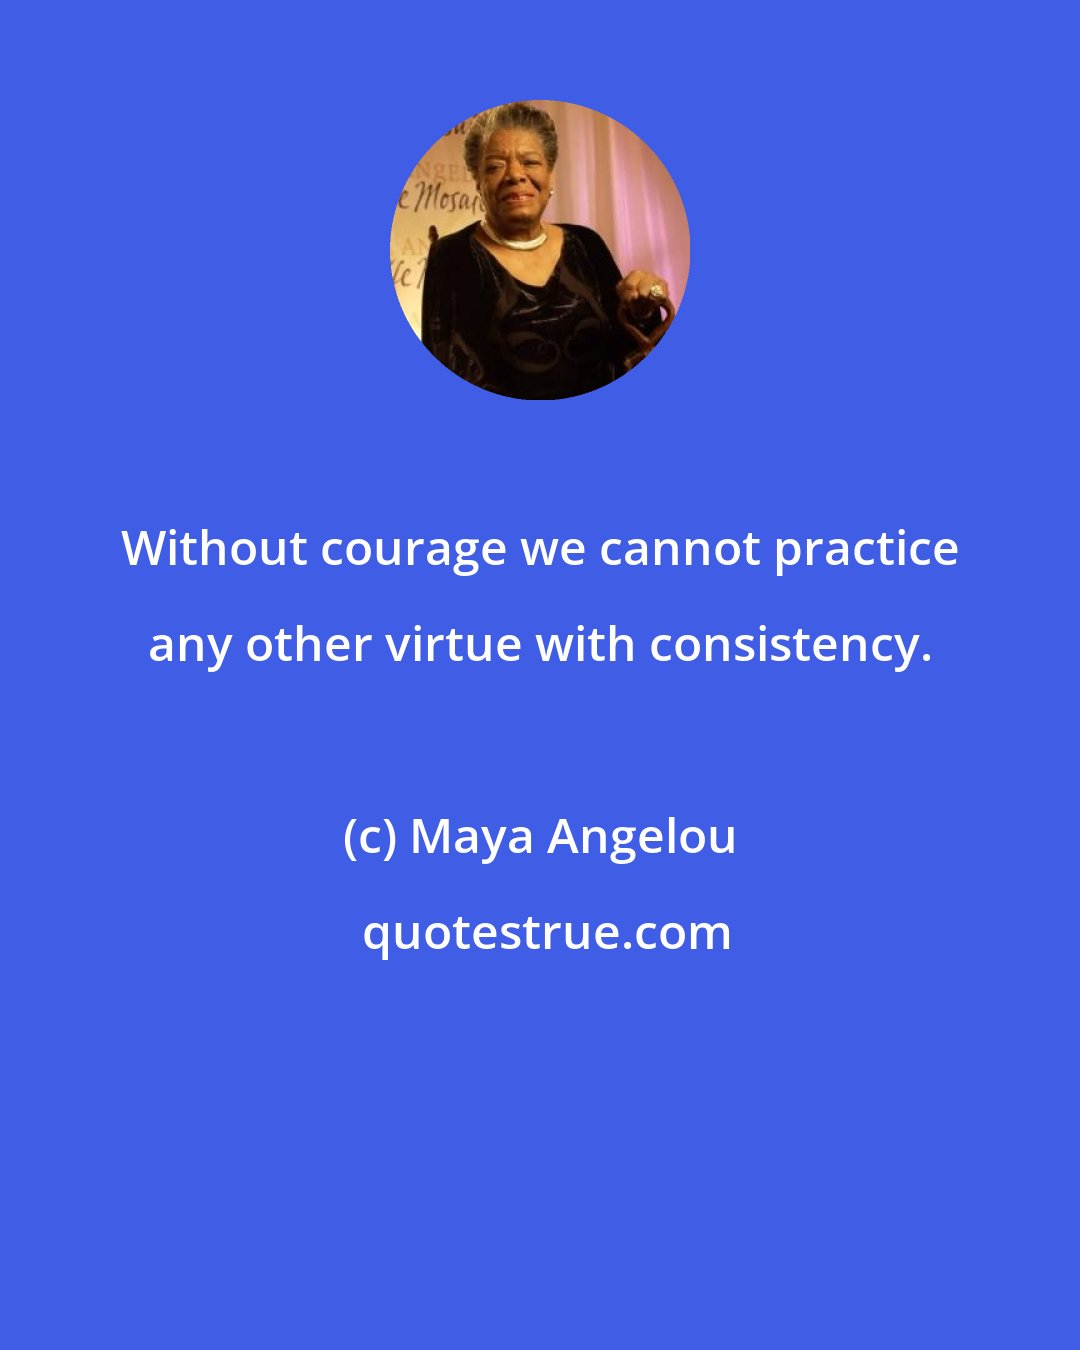 Maya Angelou: Without courage we cannot practice any other virtue with consistency.